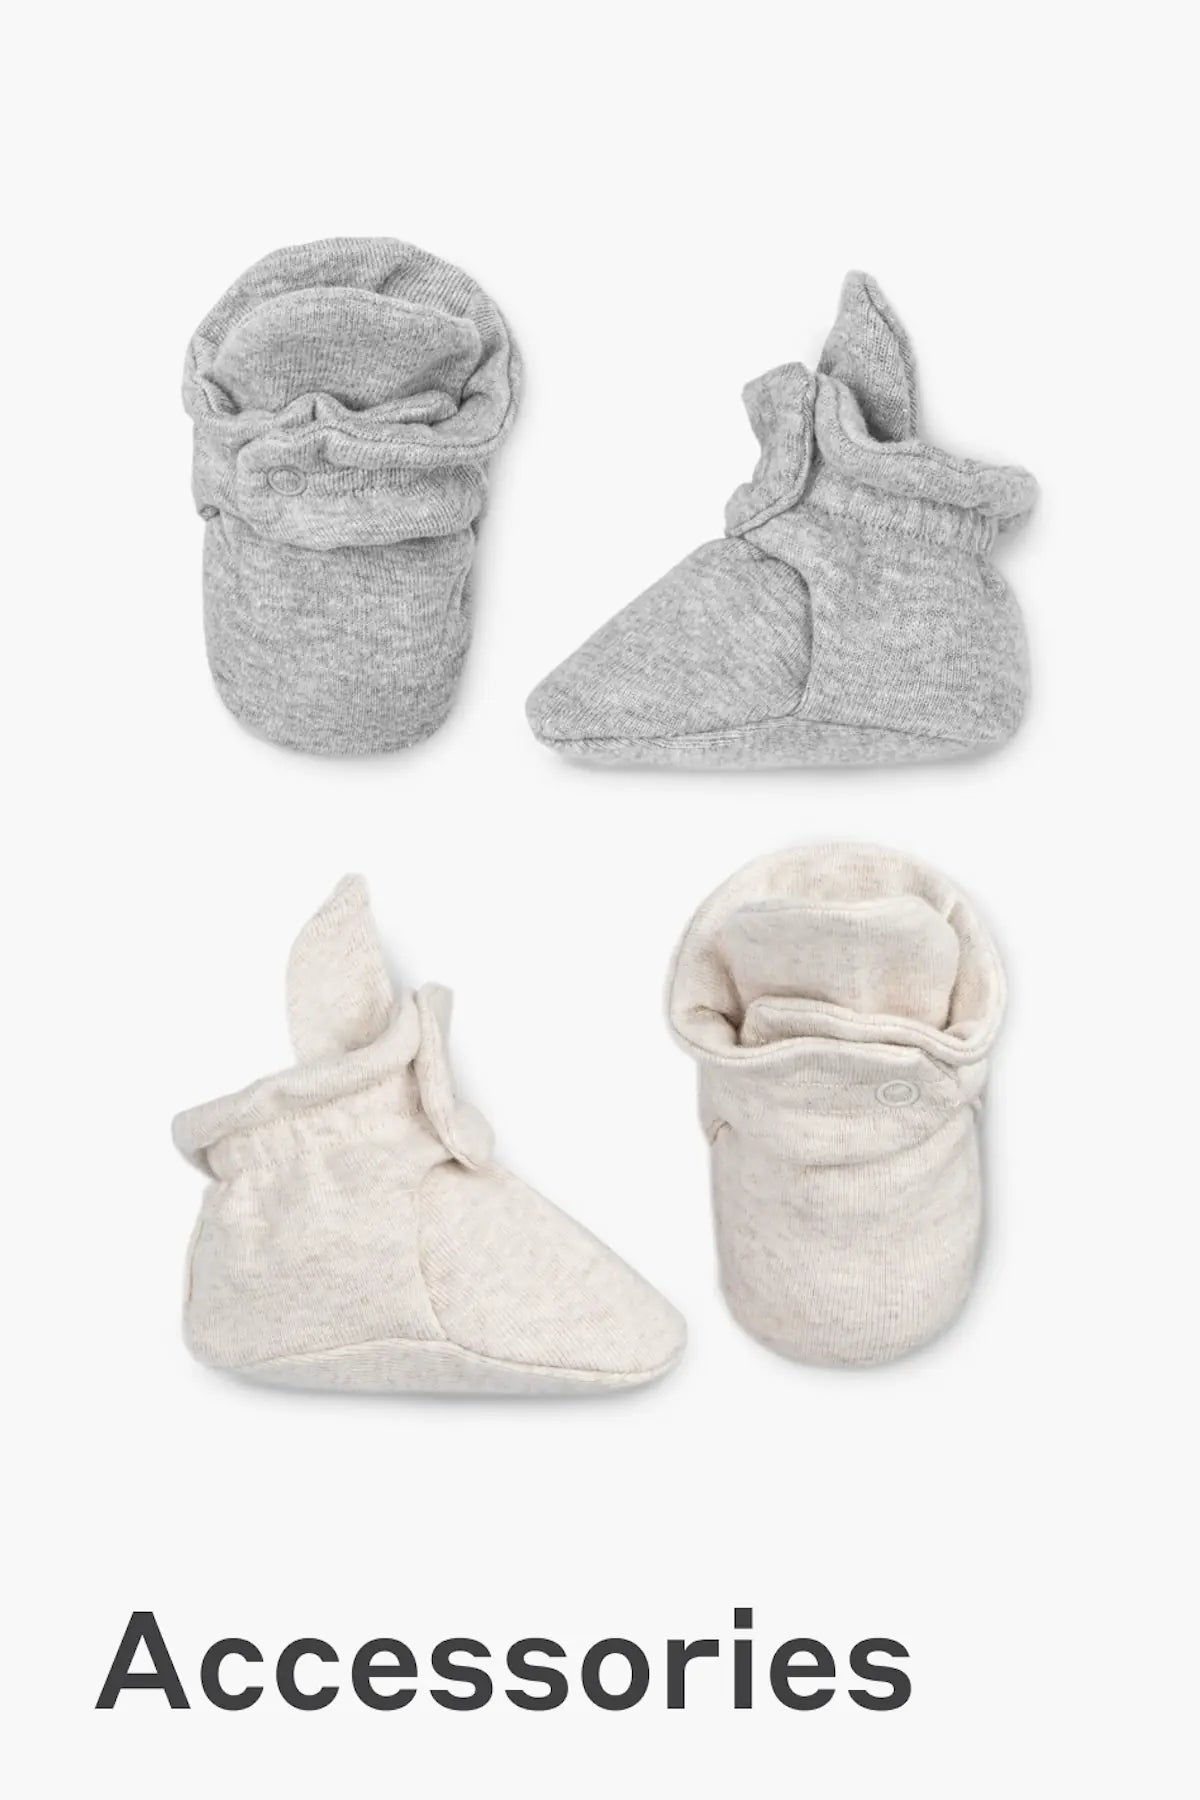 Baby Booties in multiple colors